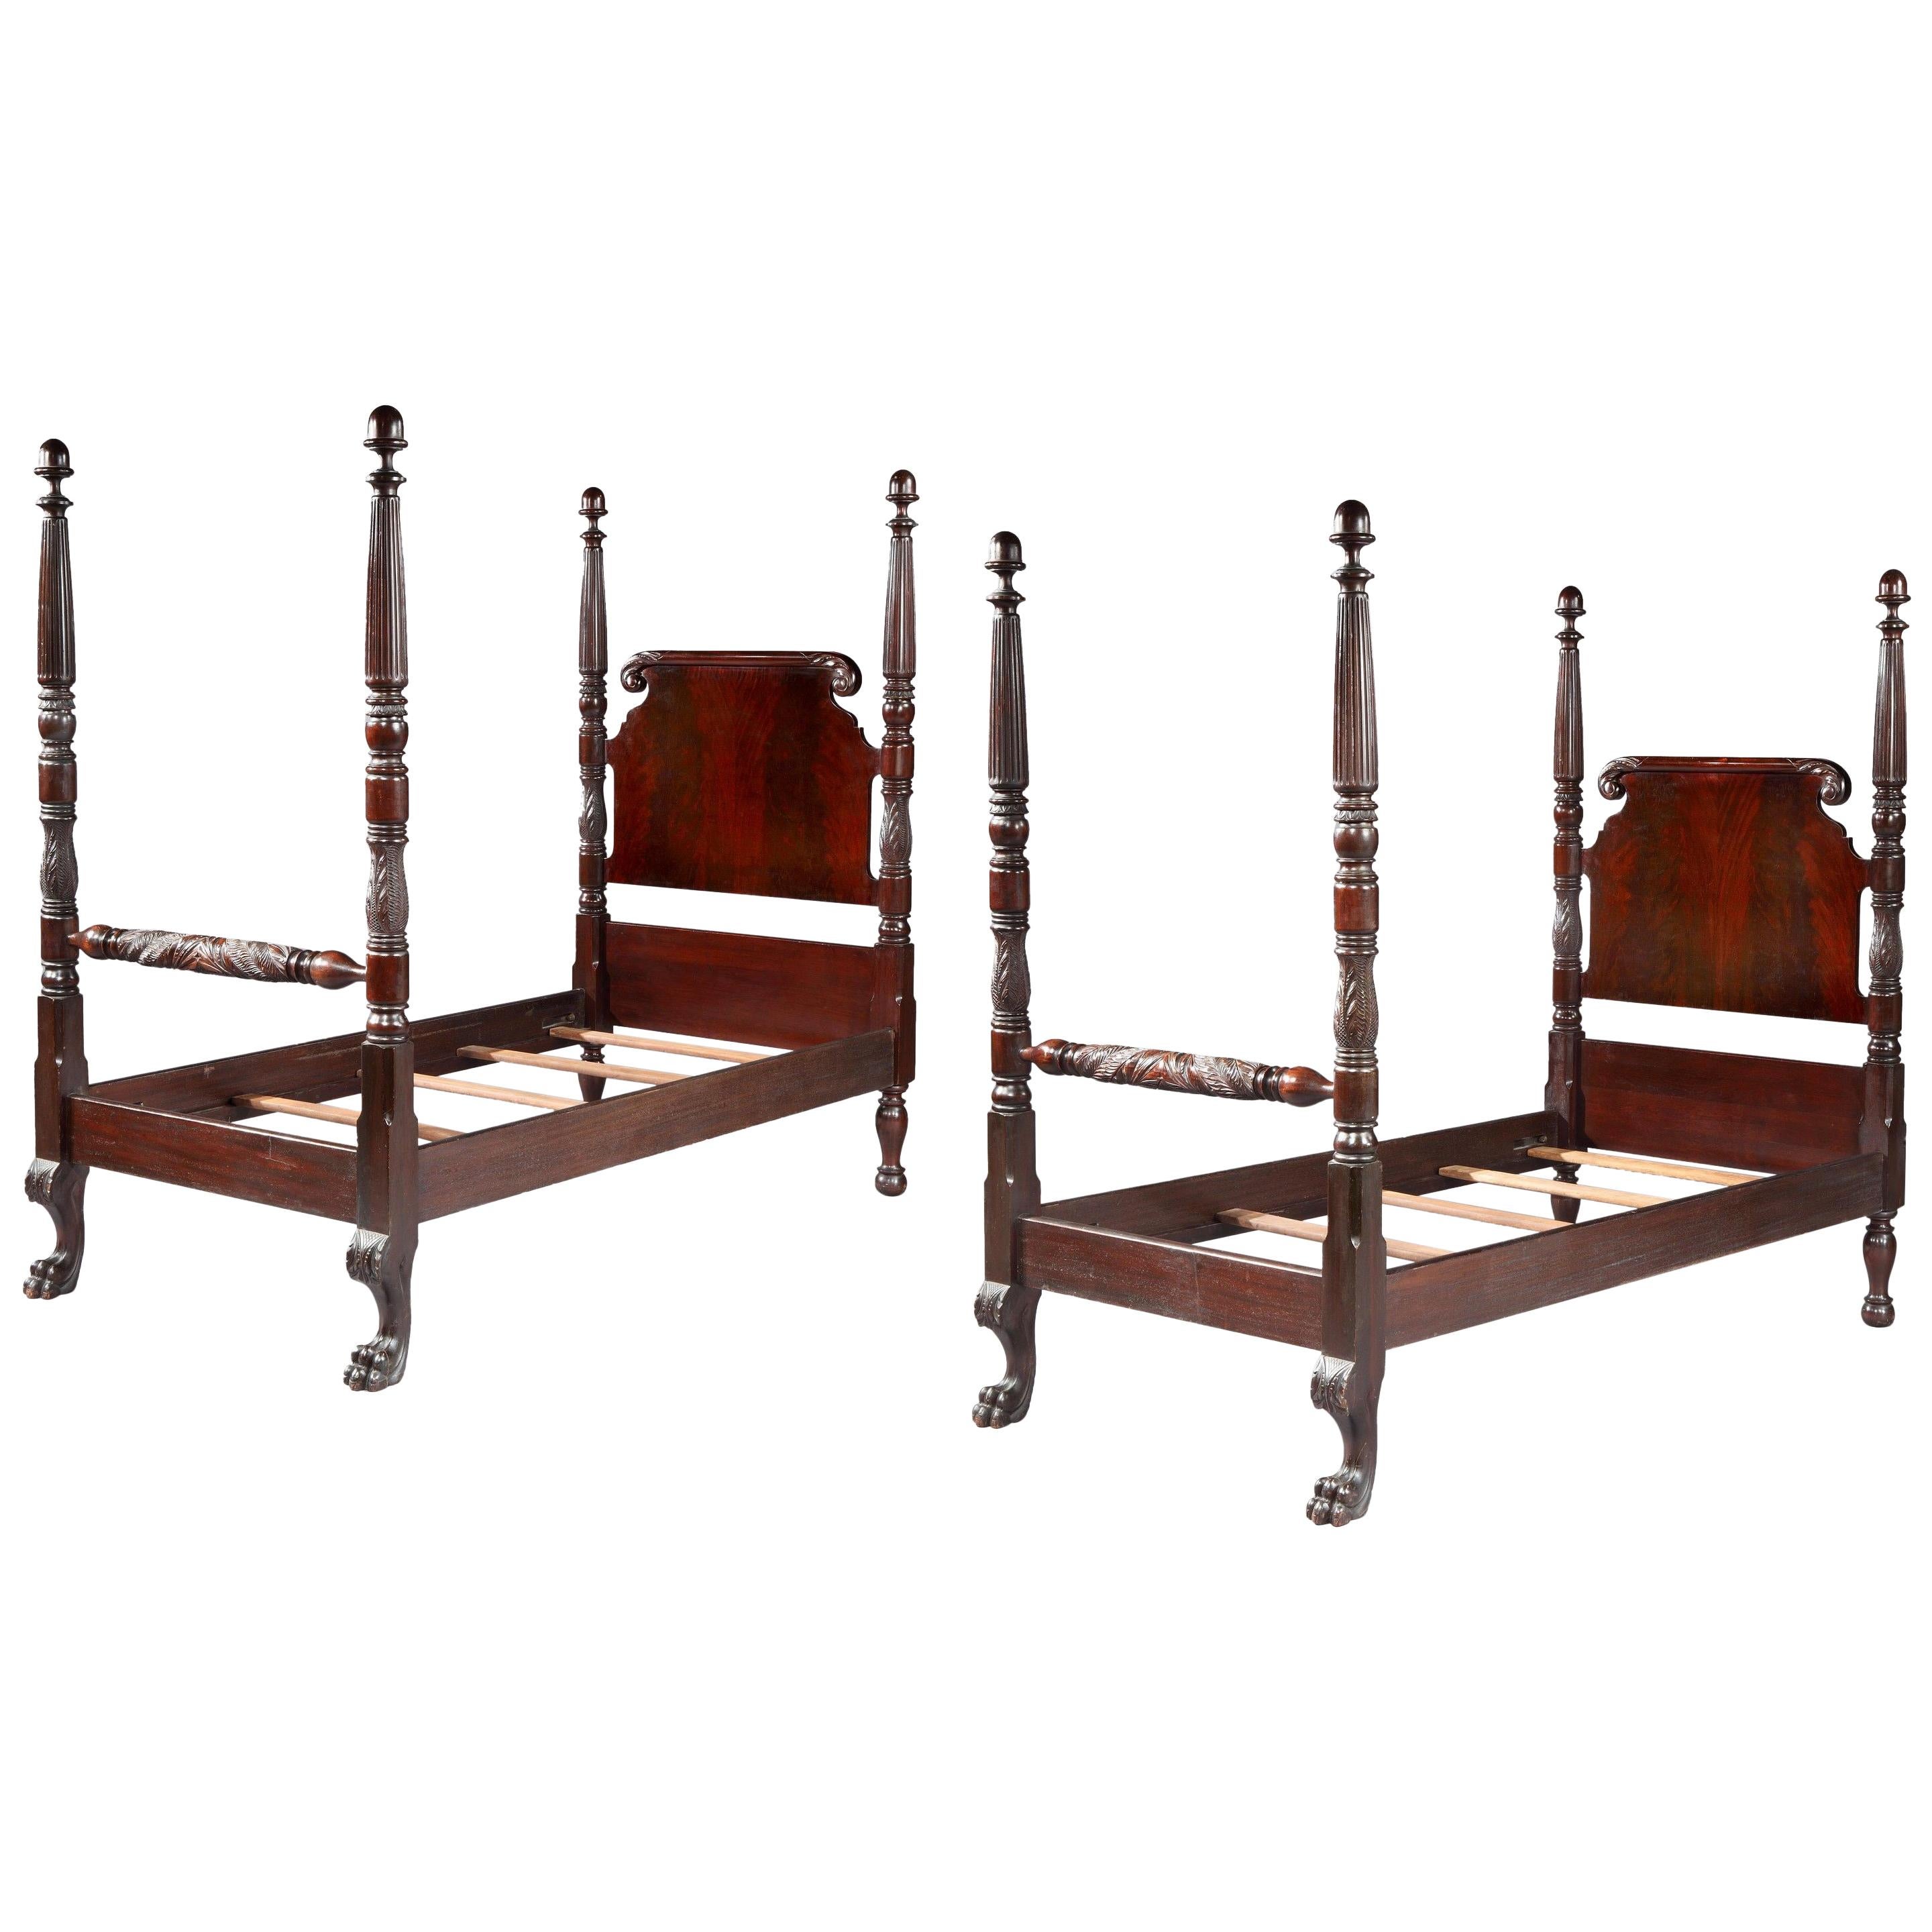 Pair of Beds, 19th Century, American Colonial-Style, Mahogany, ‘Antiquarian’ For Sale